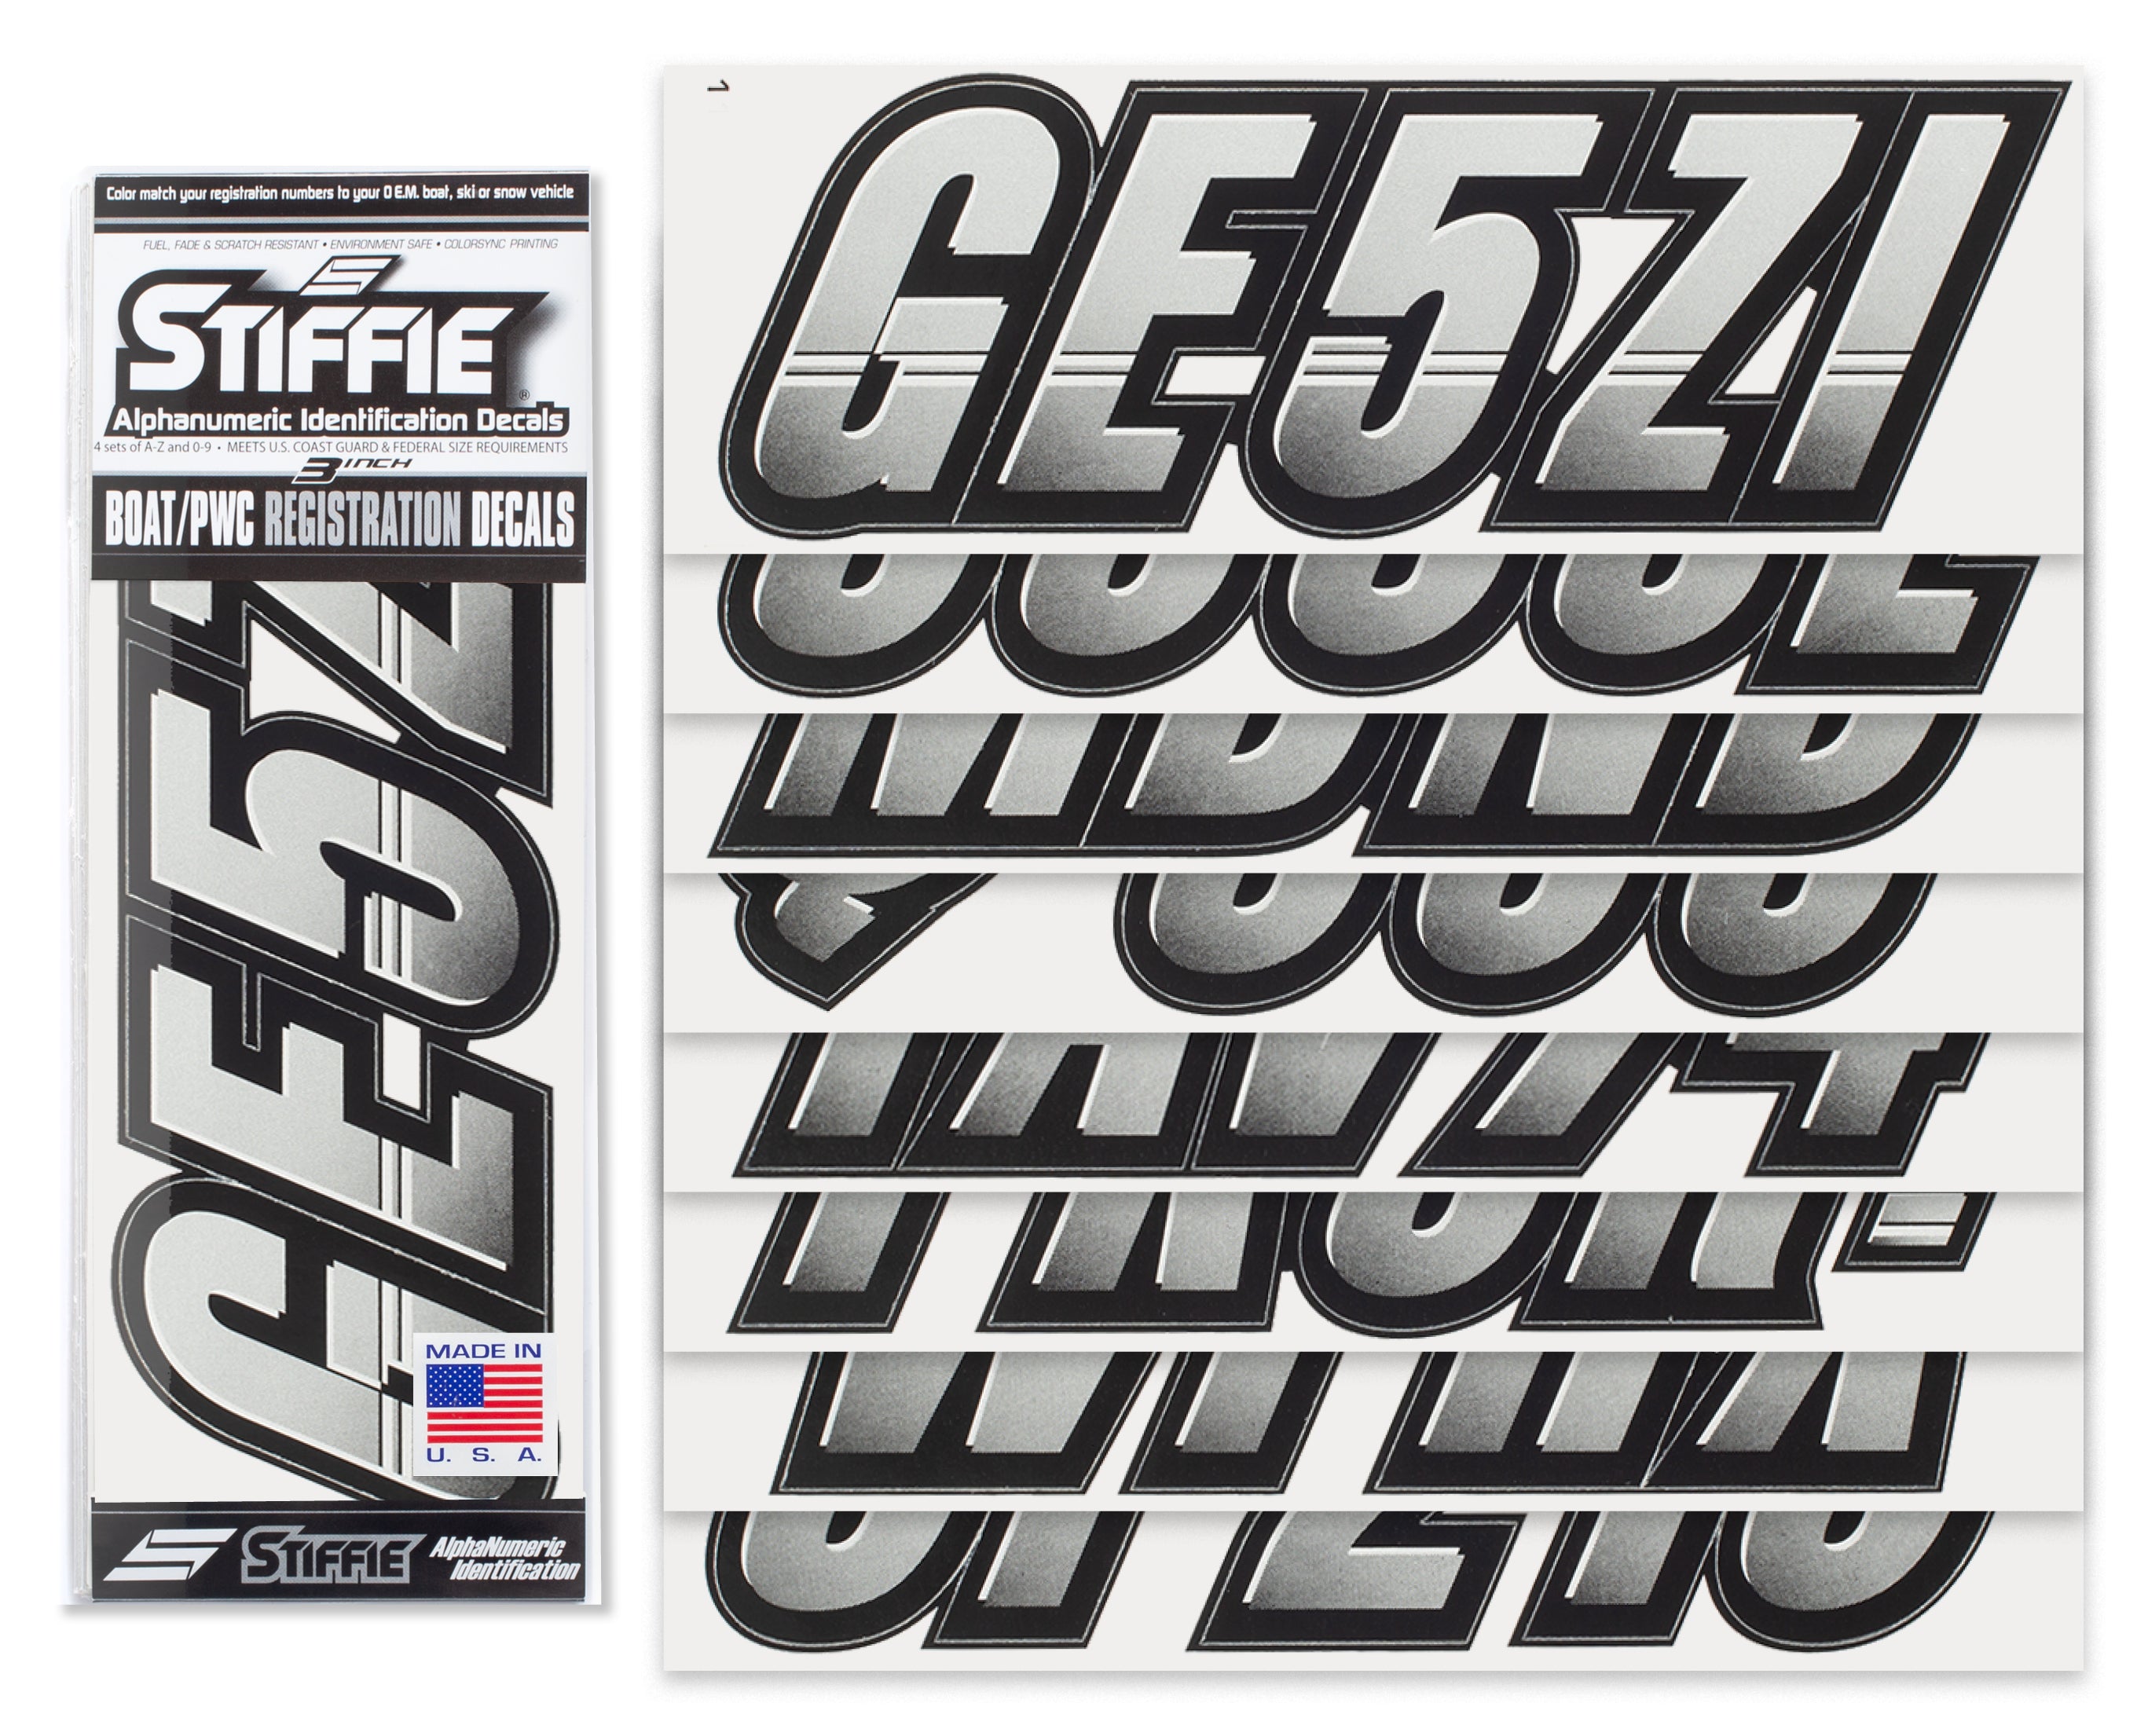 Stiffie Techtron Silver/Black 3" Alpha-Numeric Registration Identification Numbers Stickers Decals for Boats & Personal Watercraft